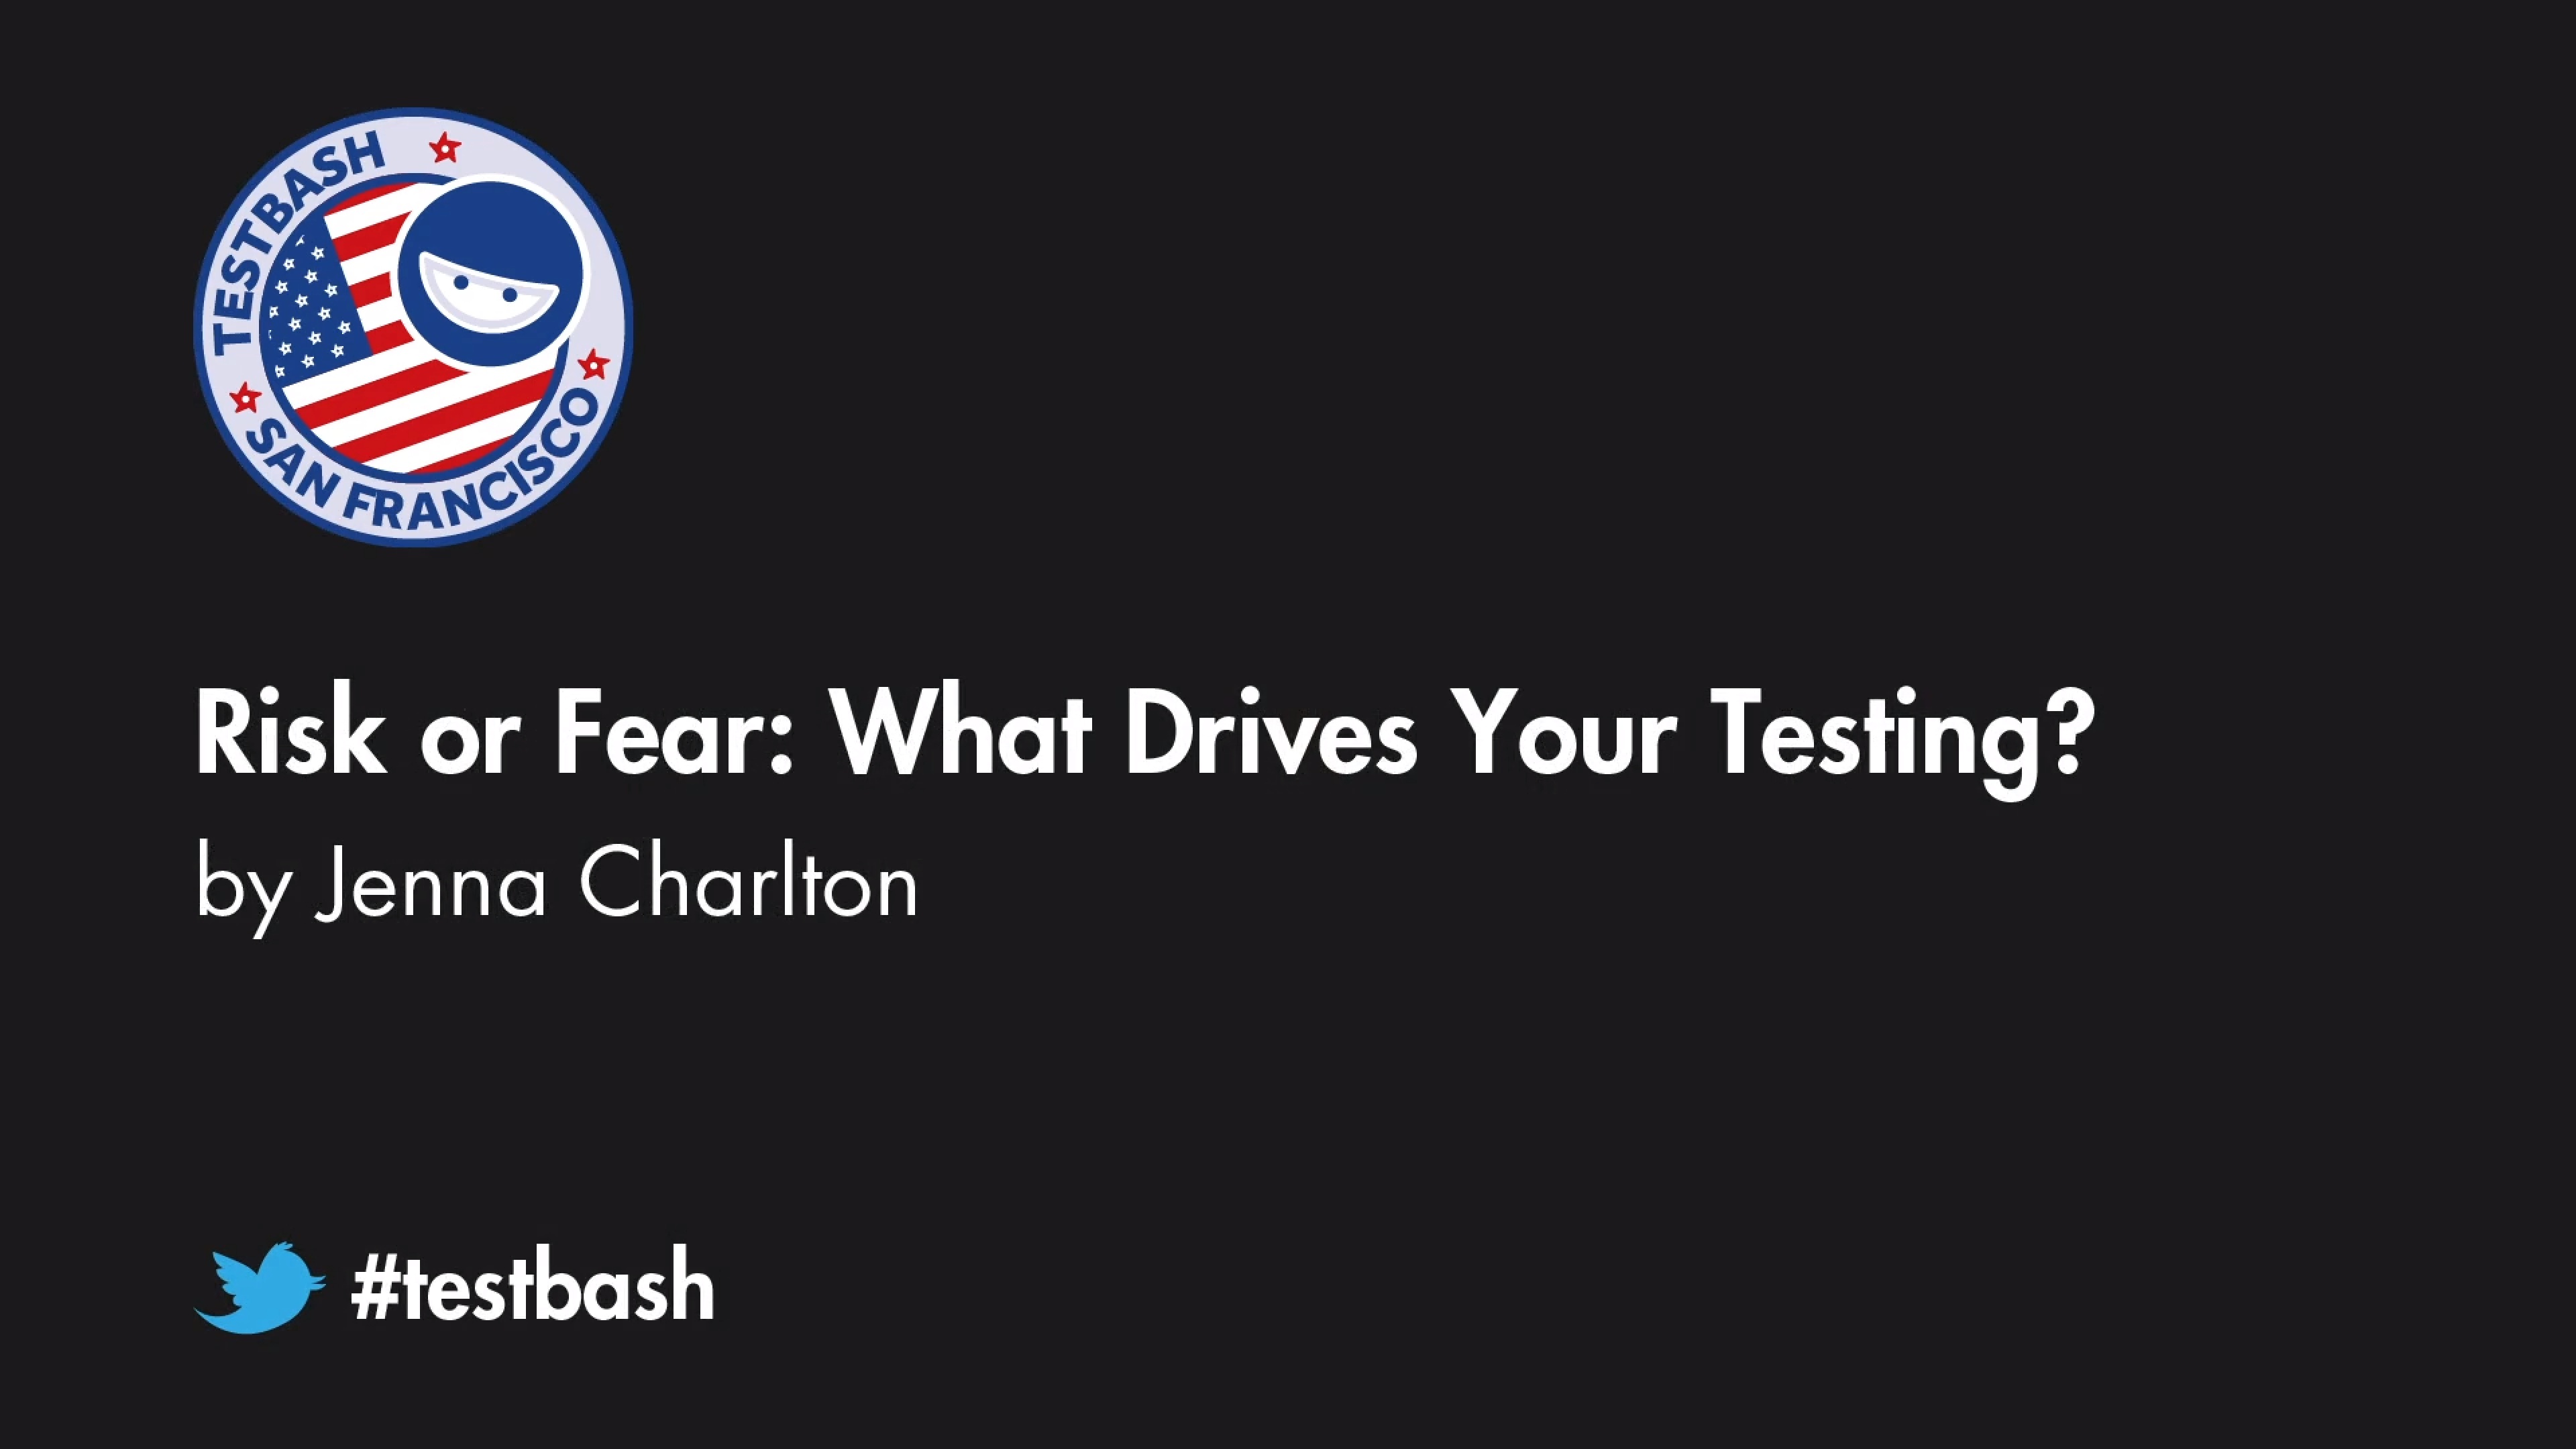 Risk or Fear: What Drives Your Testing?- Jenna Charlton